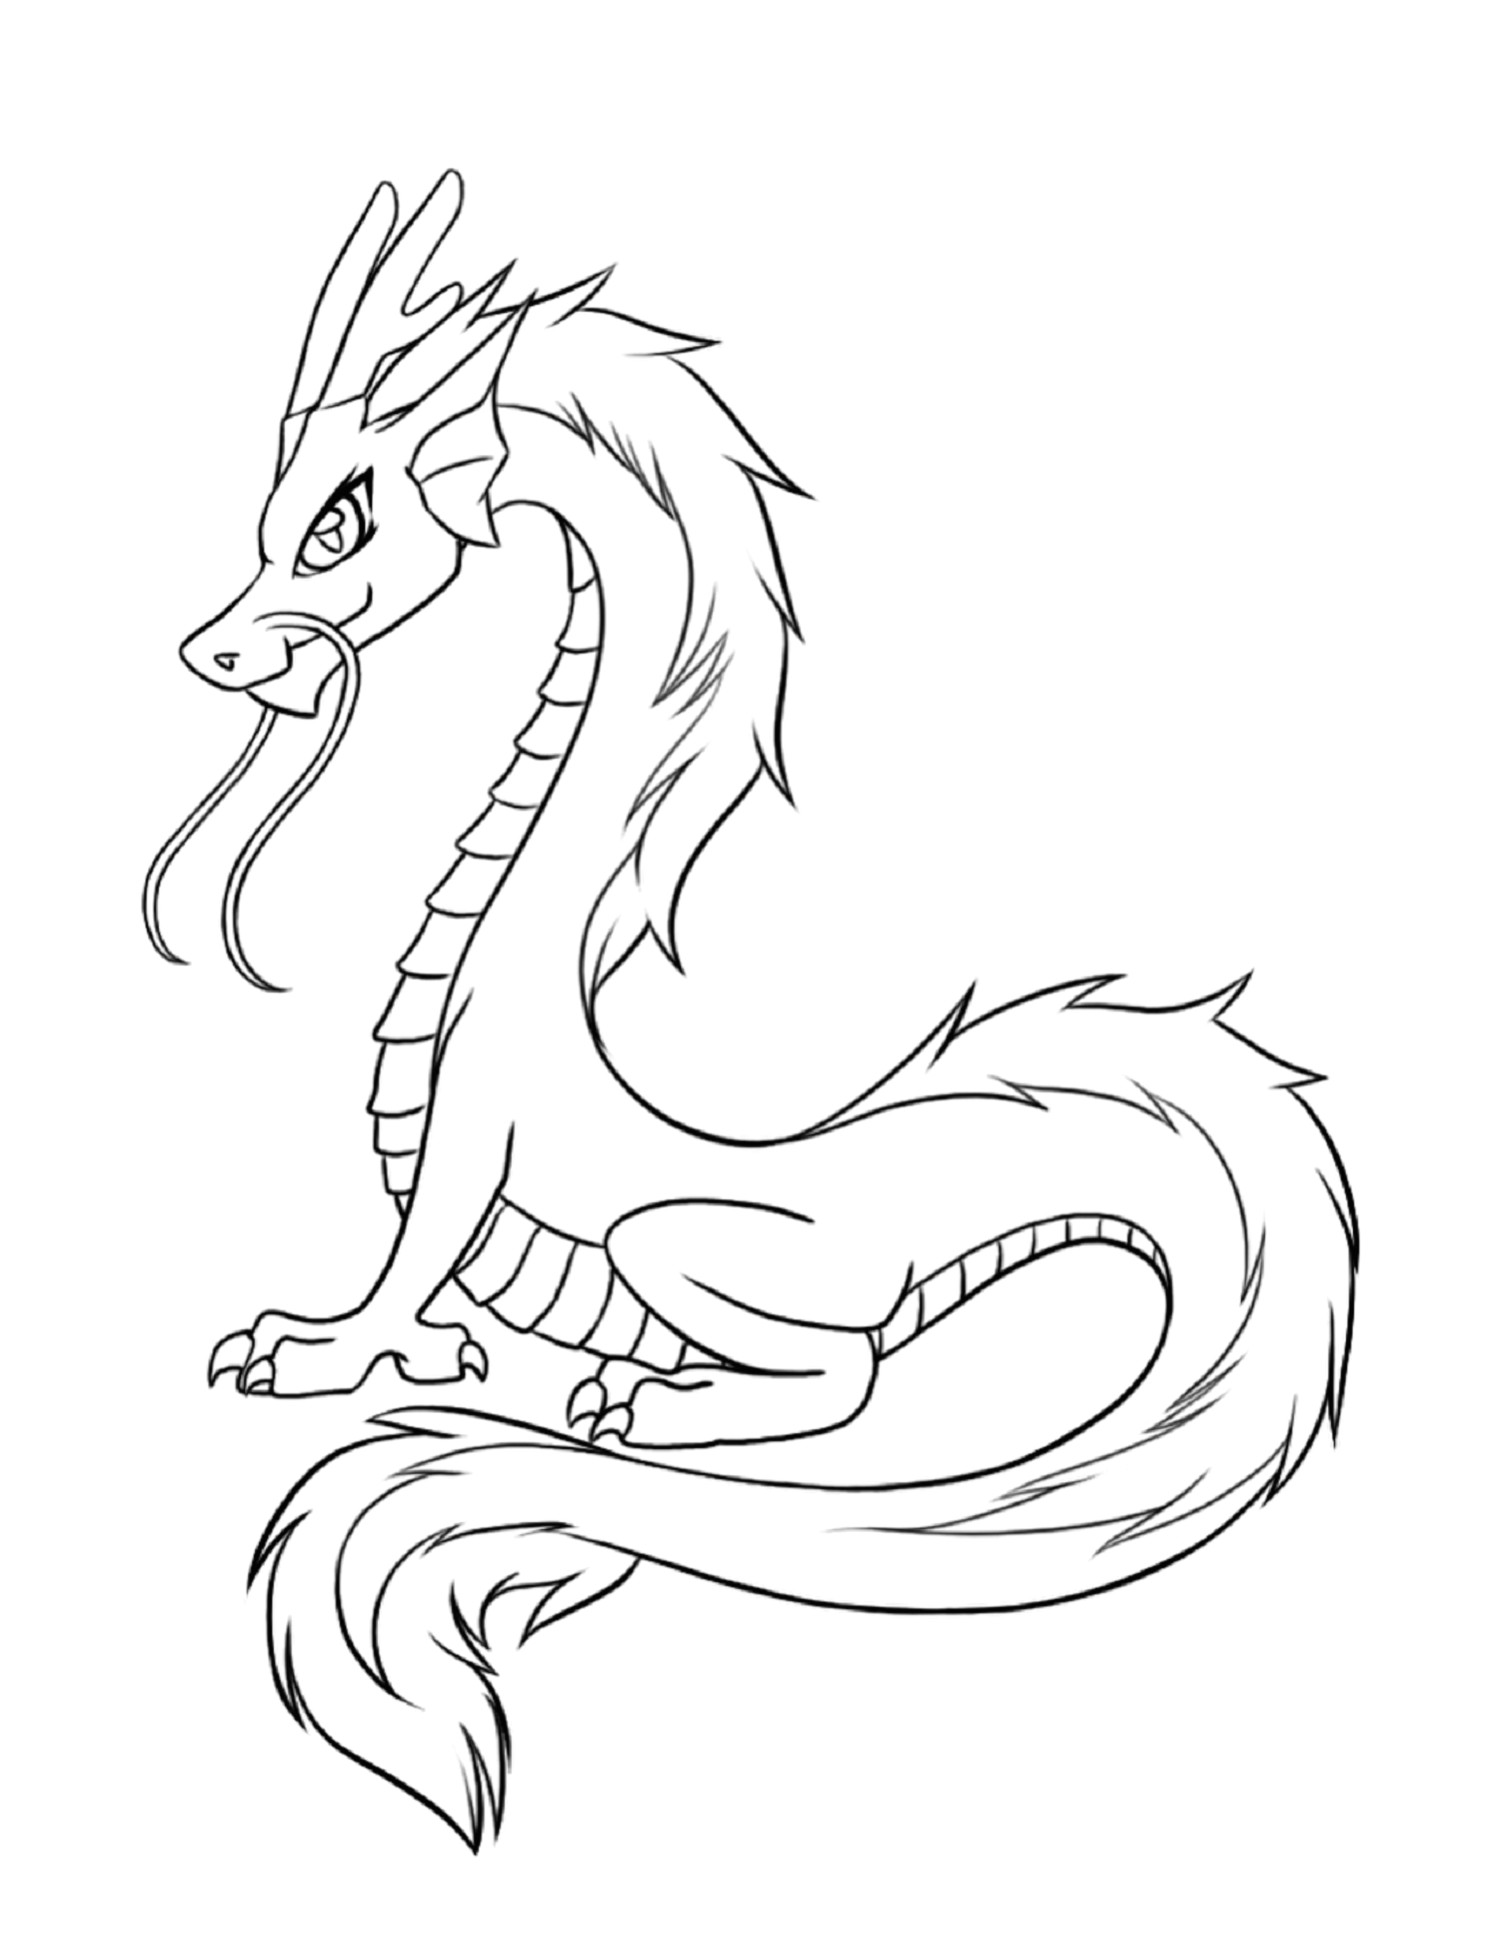 dragon coloring pages for fun coloring